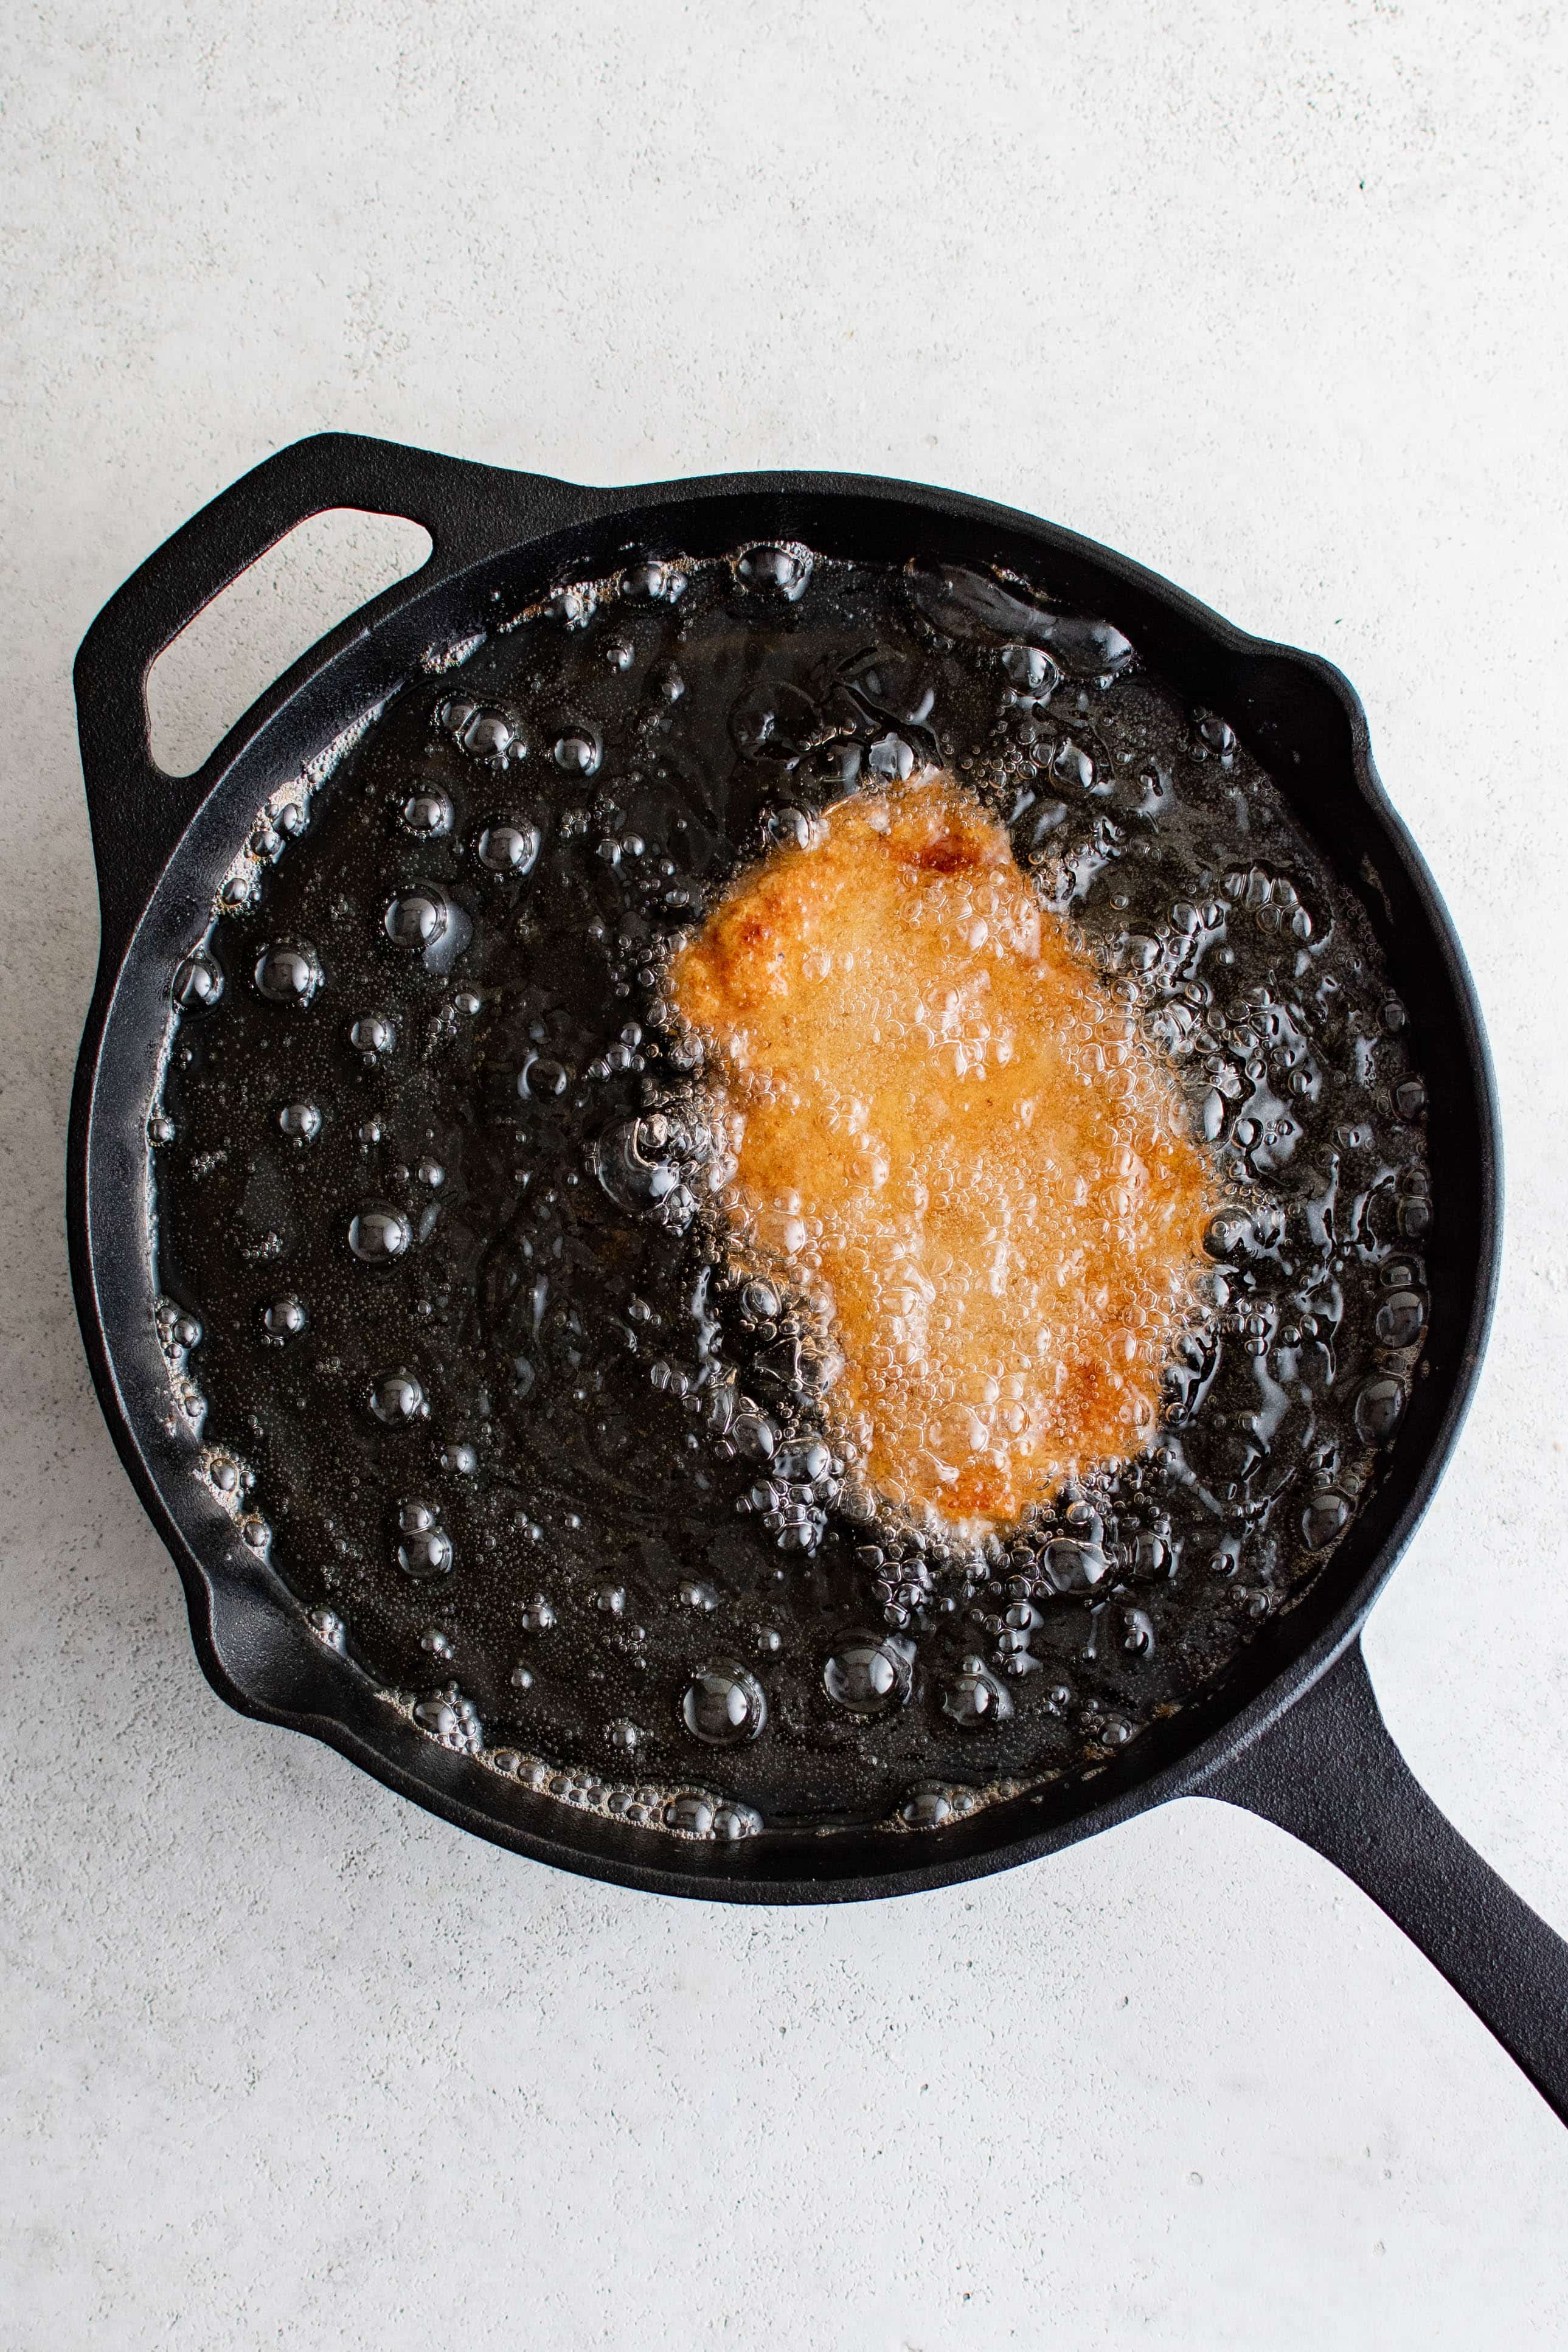 Breaded pork cutlet frying in a large cast iron skillet filled with hot oil.